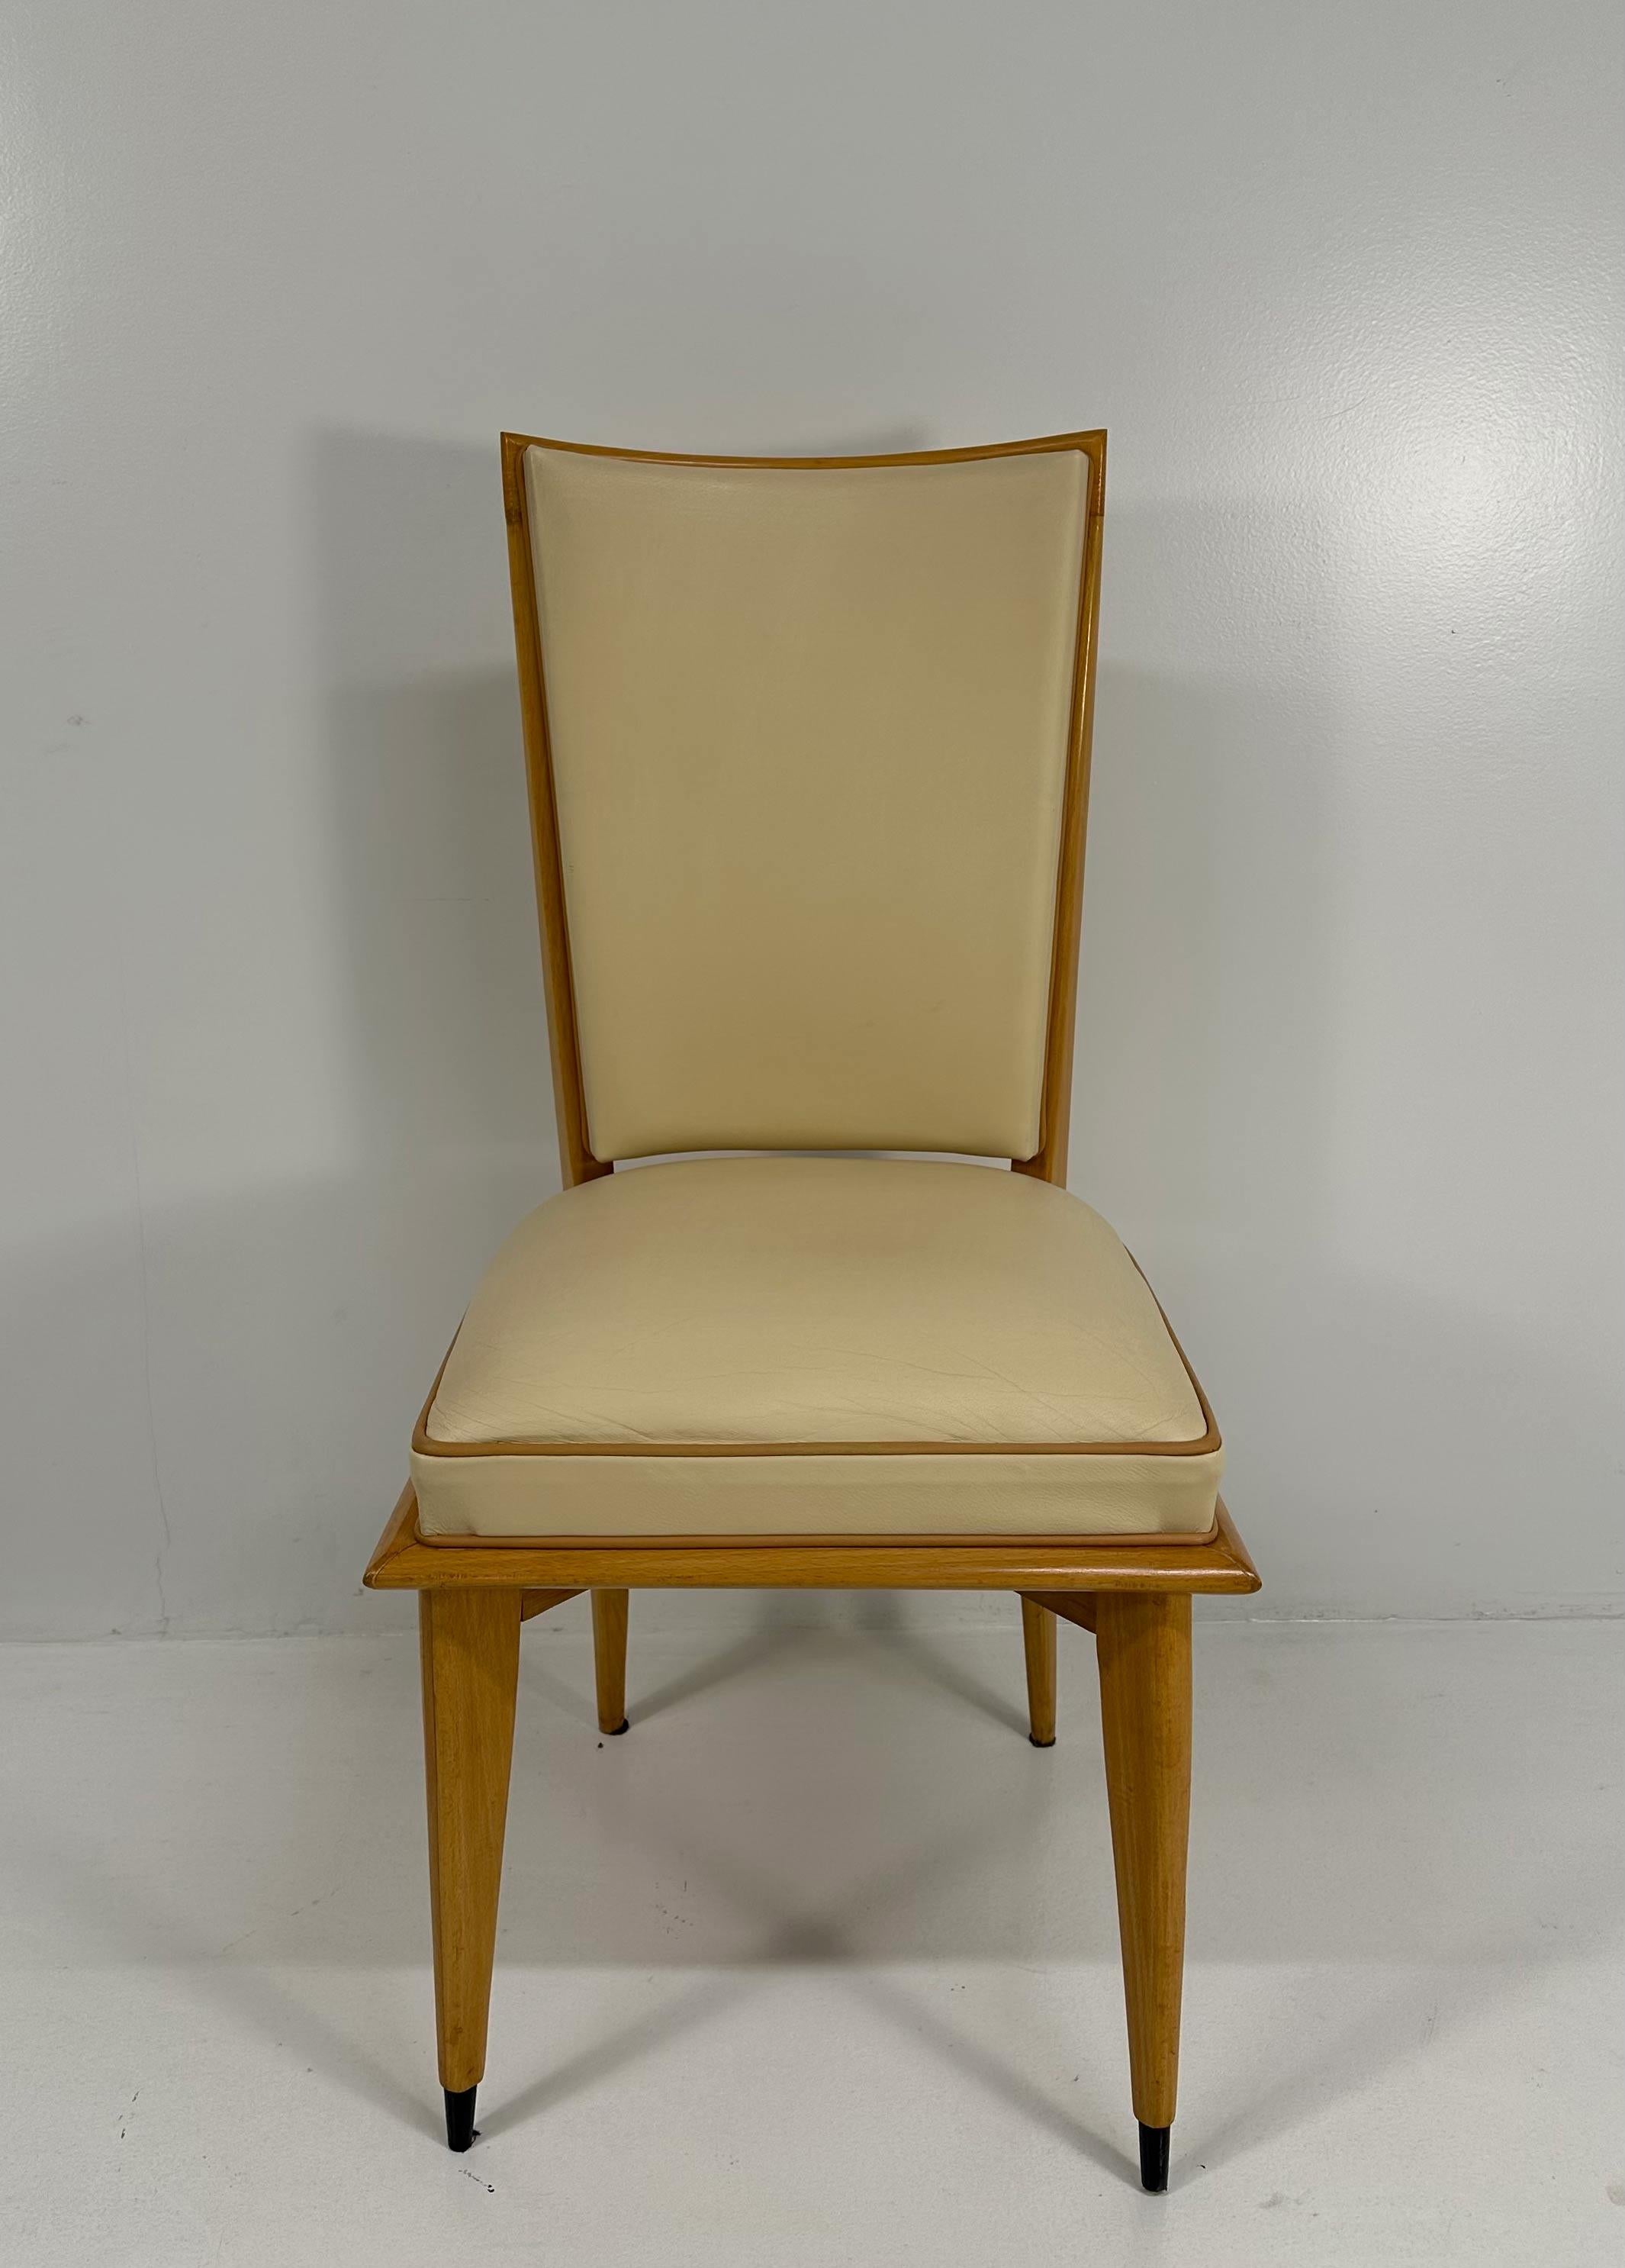 French Art Deco Set of 12 Chairs in Maple and Cream Leather, 1930s For Sale 1